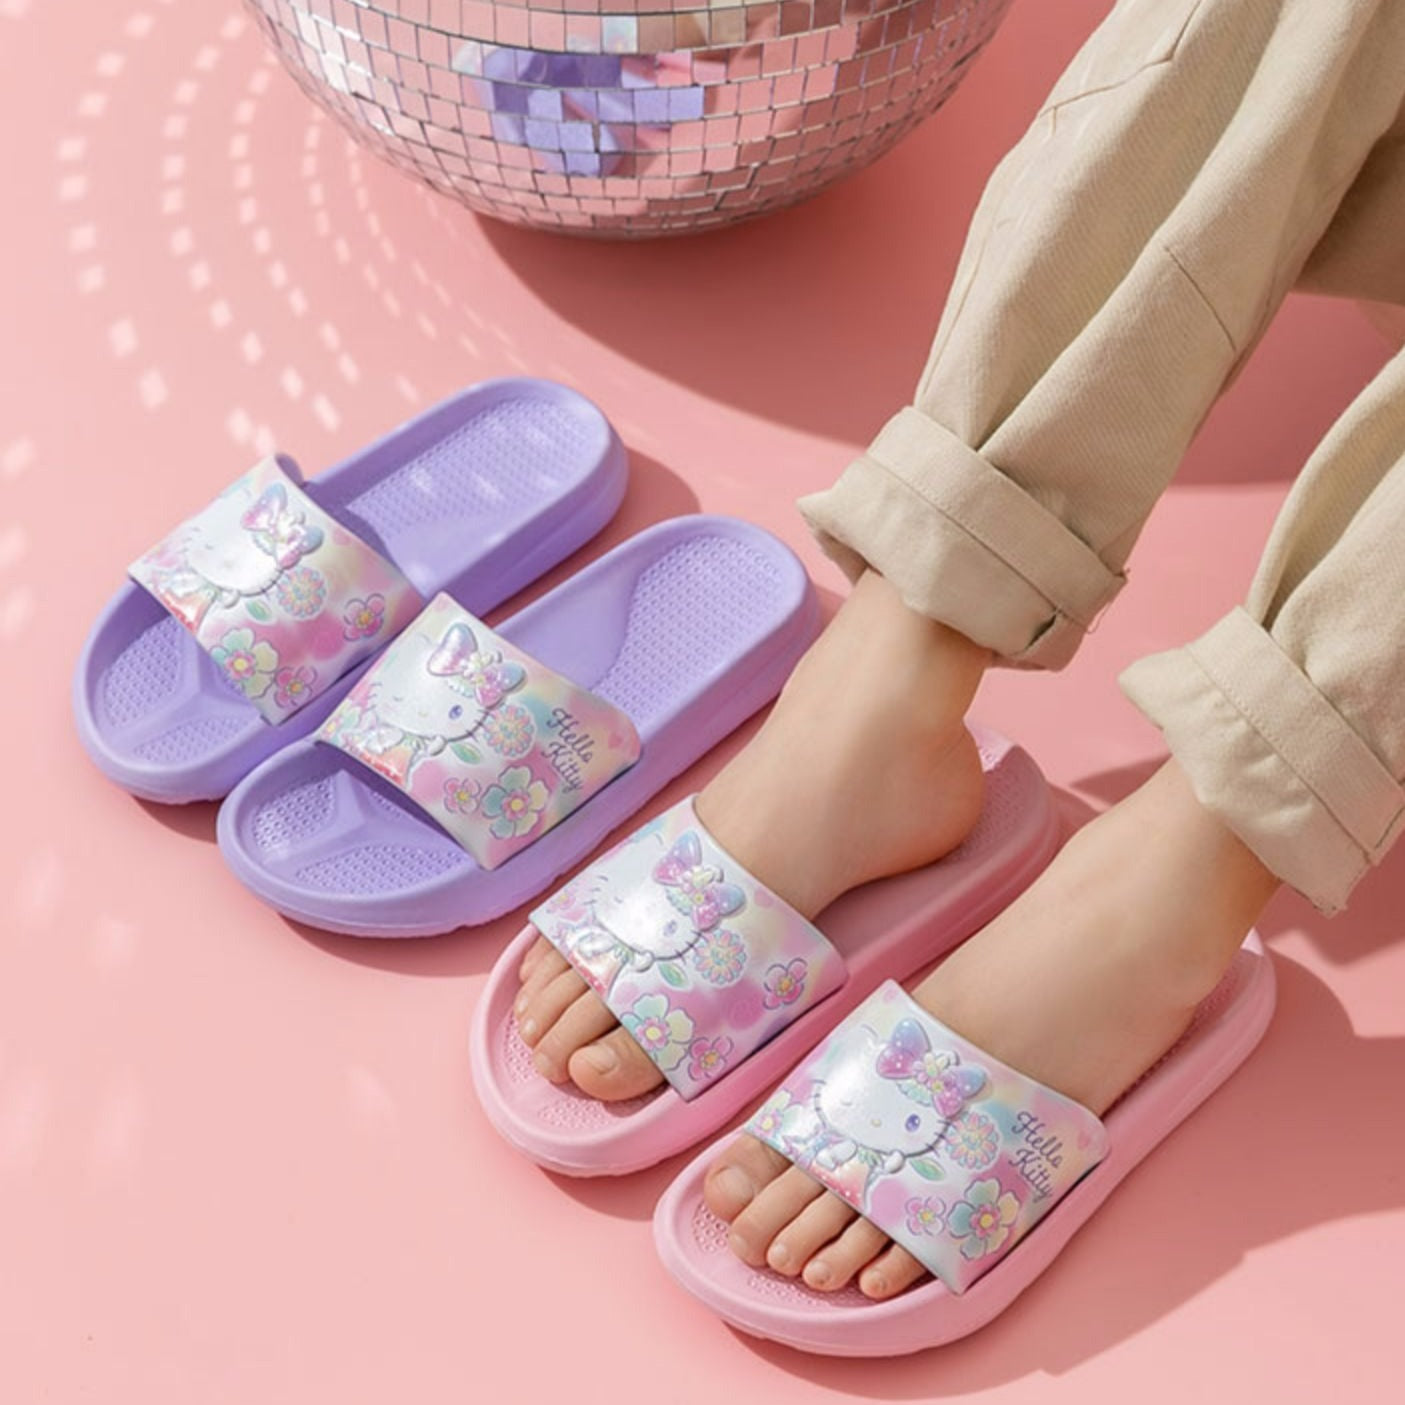 Hello Kitty - For The Love Of Spring Home Slippers